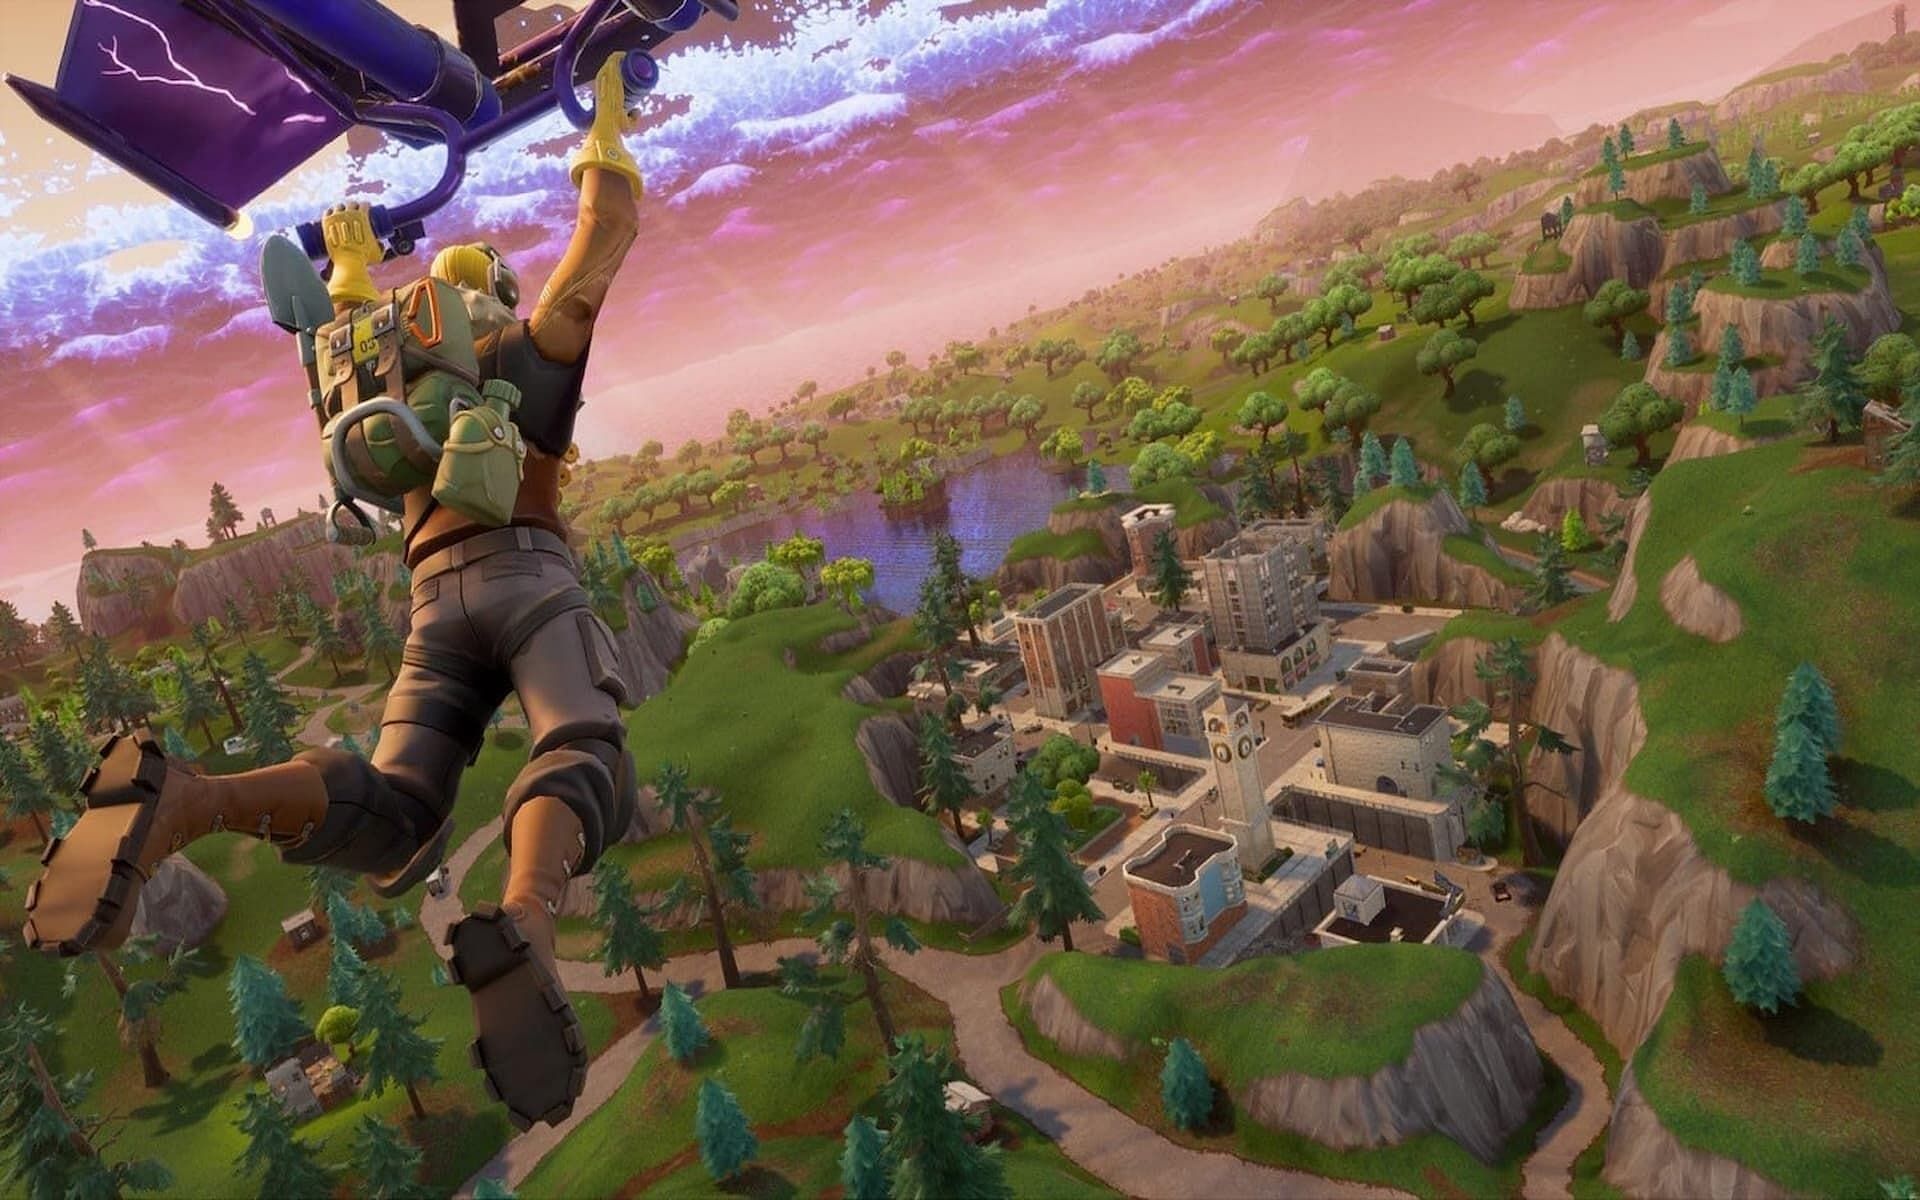 A Looper dropping onto the island in Fortnite Chapter 1. (Image via Epic Games)